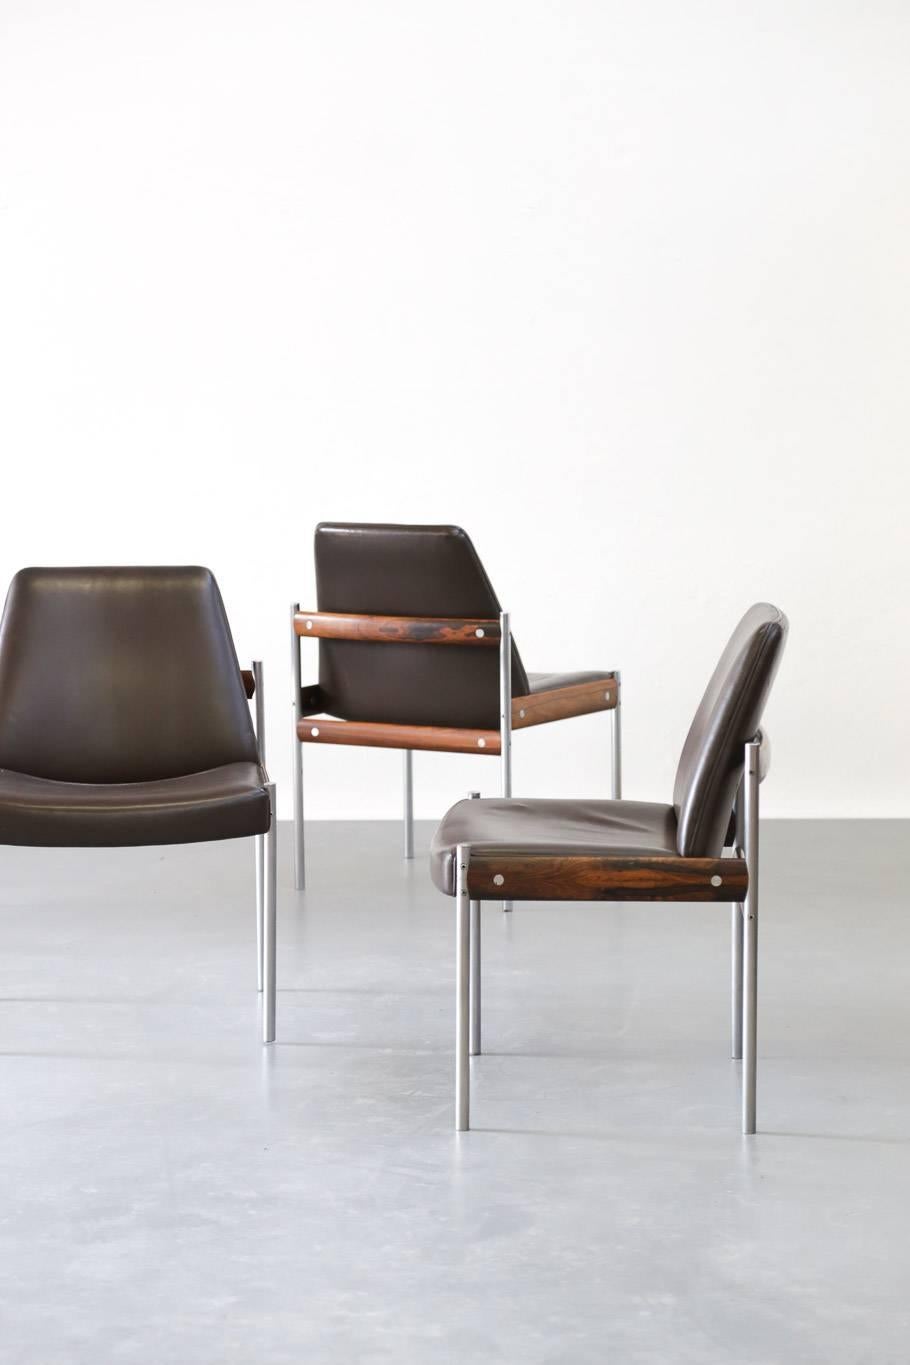 The set has four matching chairs with a metal frame, teak crossbars and leather seat and backrest.
Designed by Sven Ivar Dysthe for Dokka Mobler, 1960s.